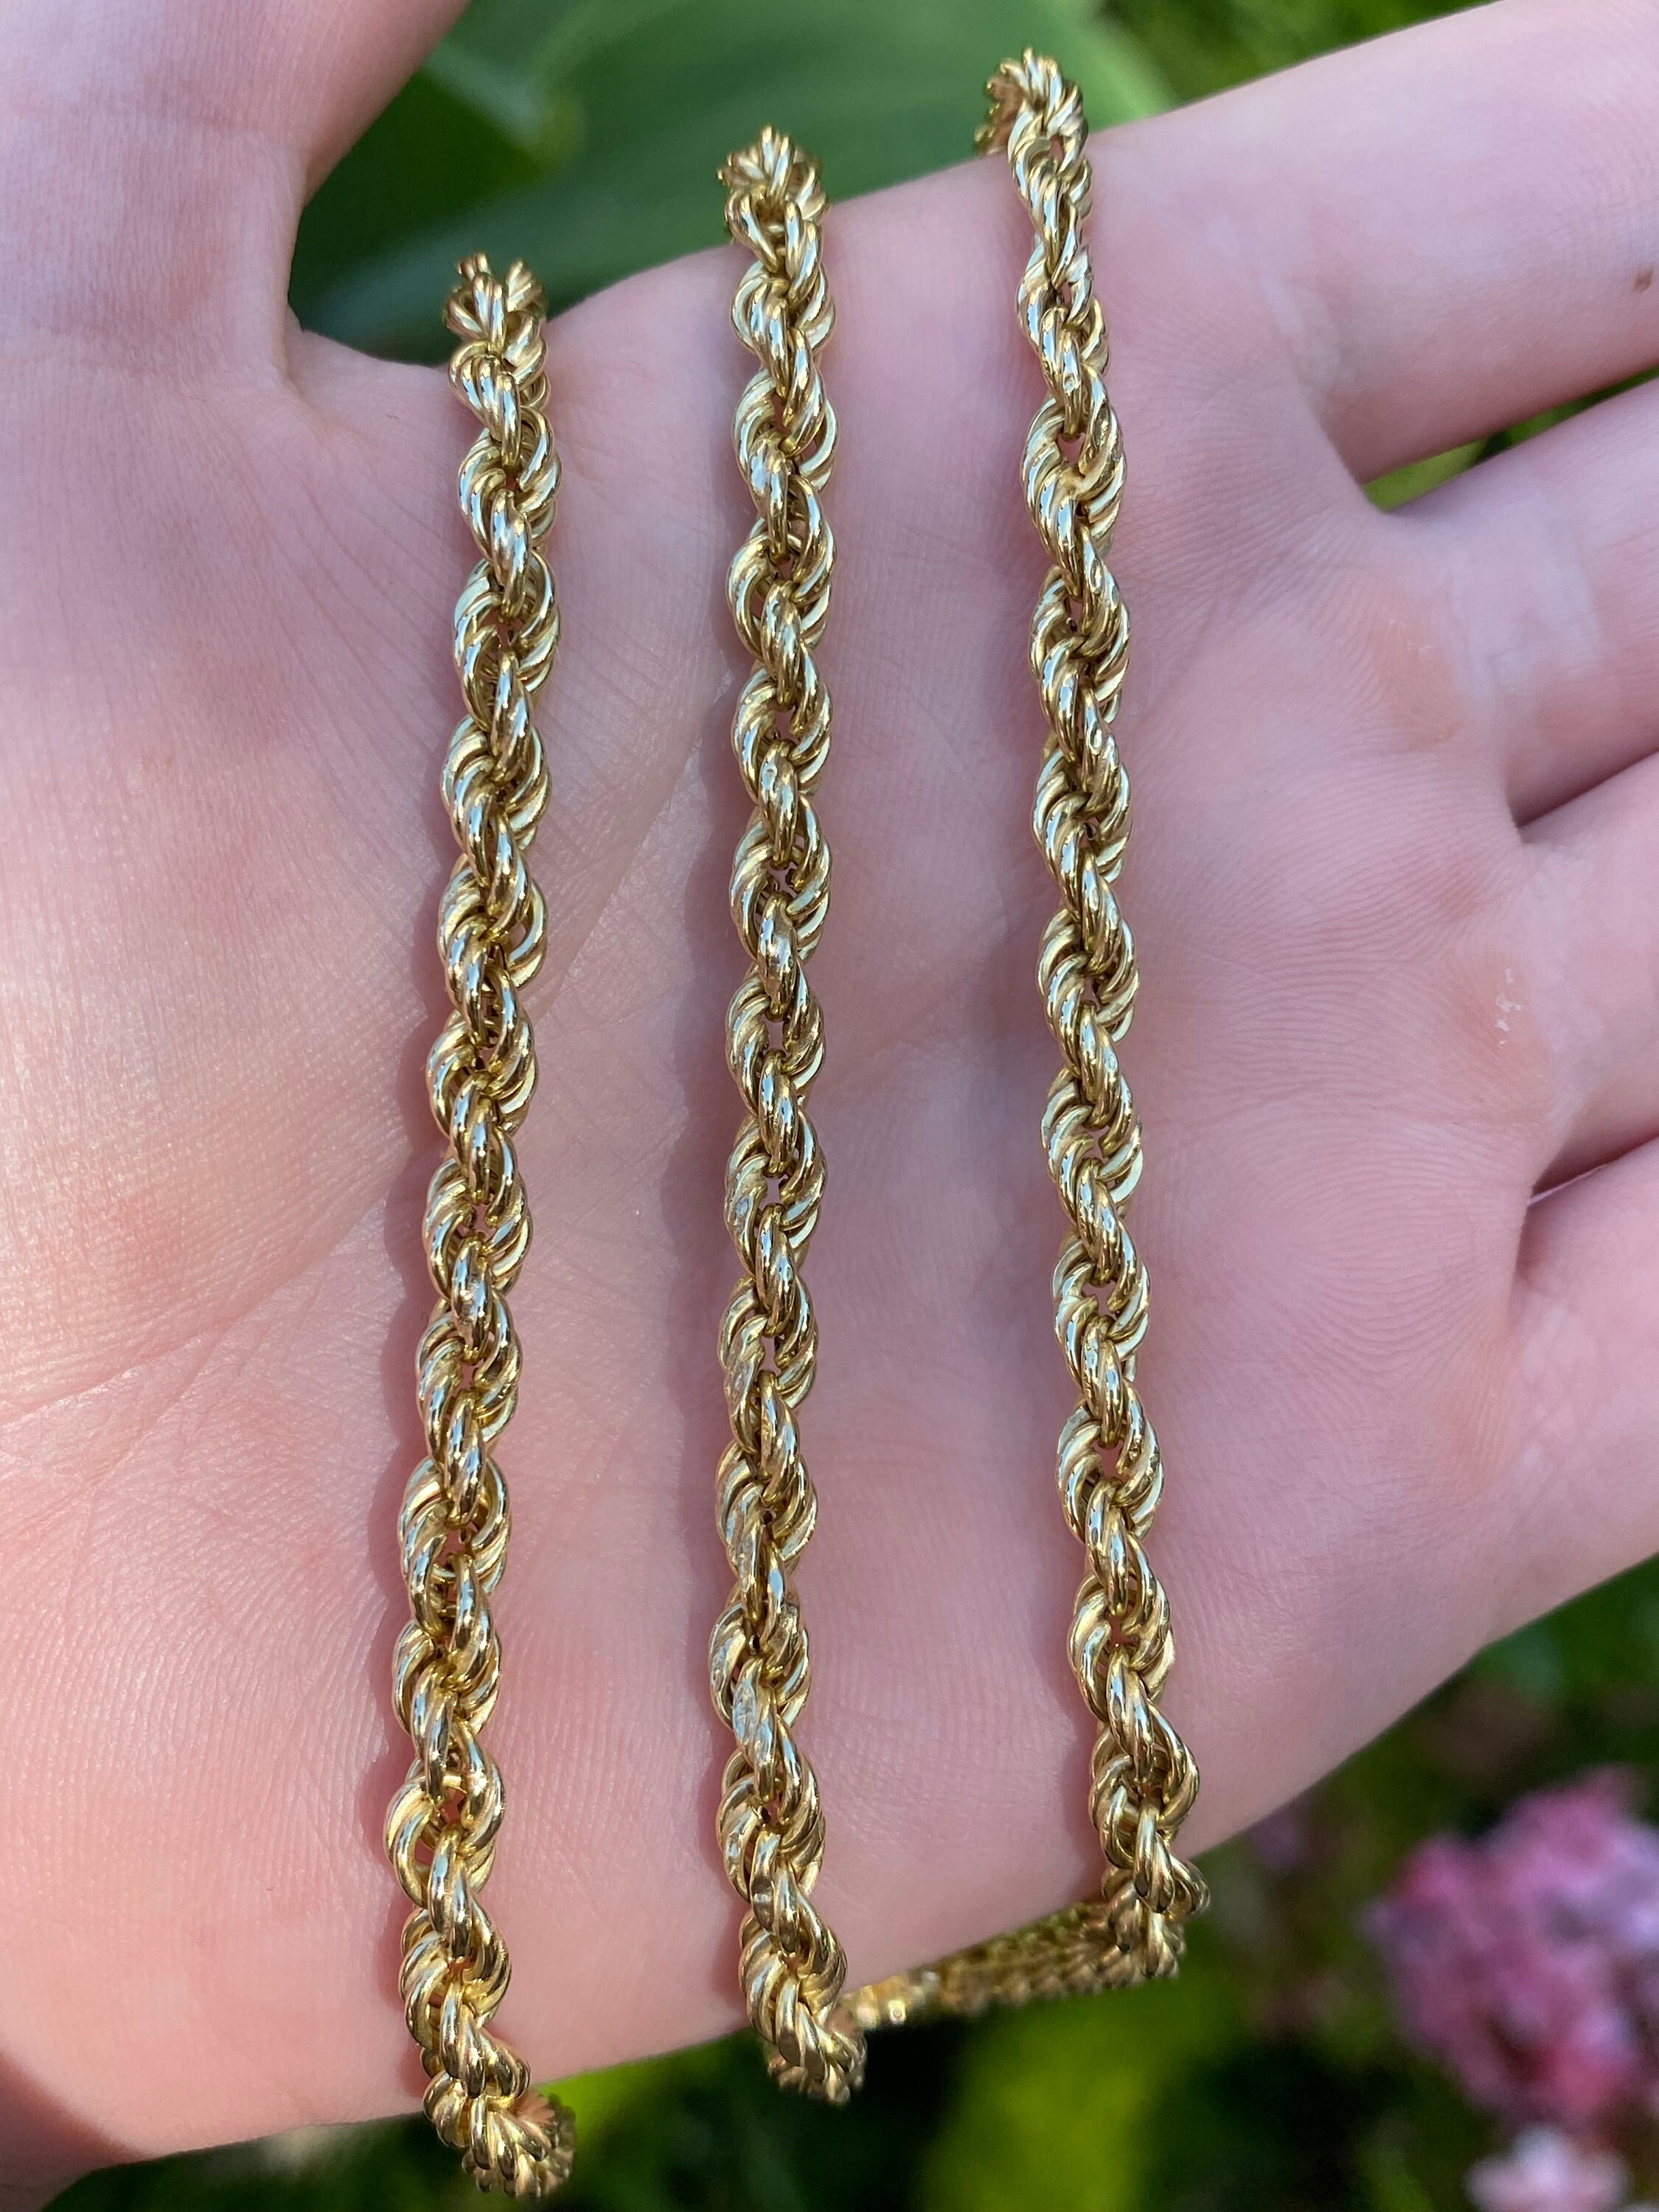 Vintage 24K 980 Solid Pure Gold Anchor Money Coin Chain Link